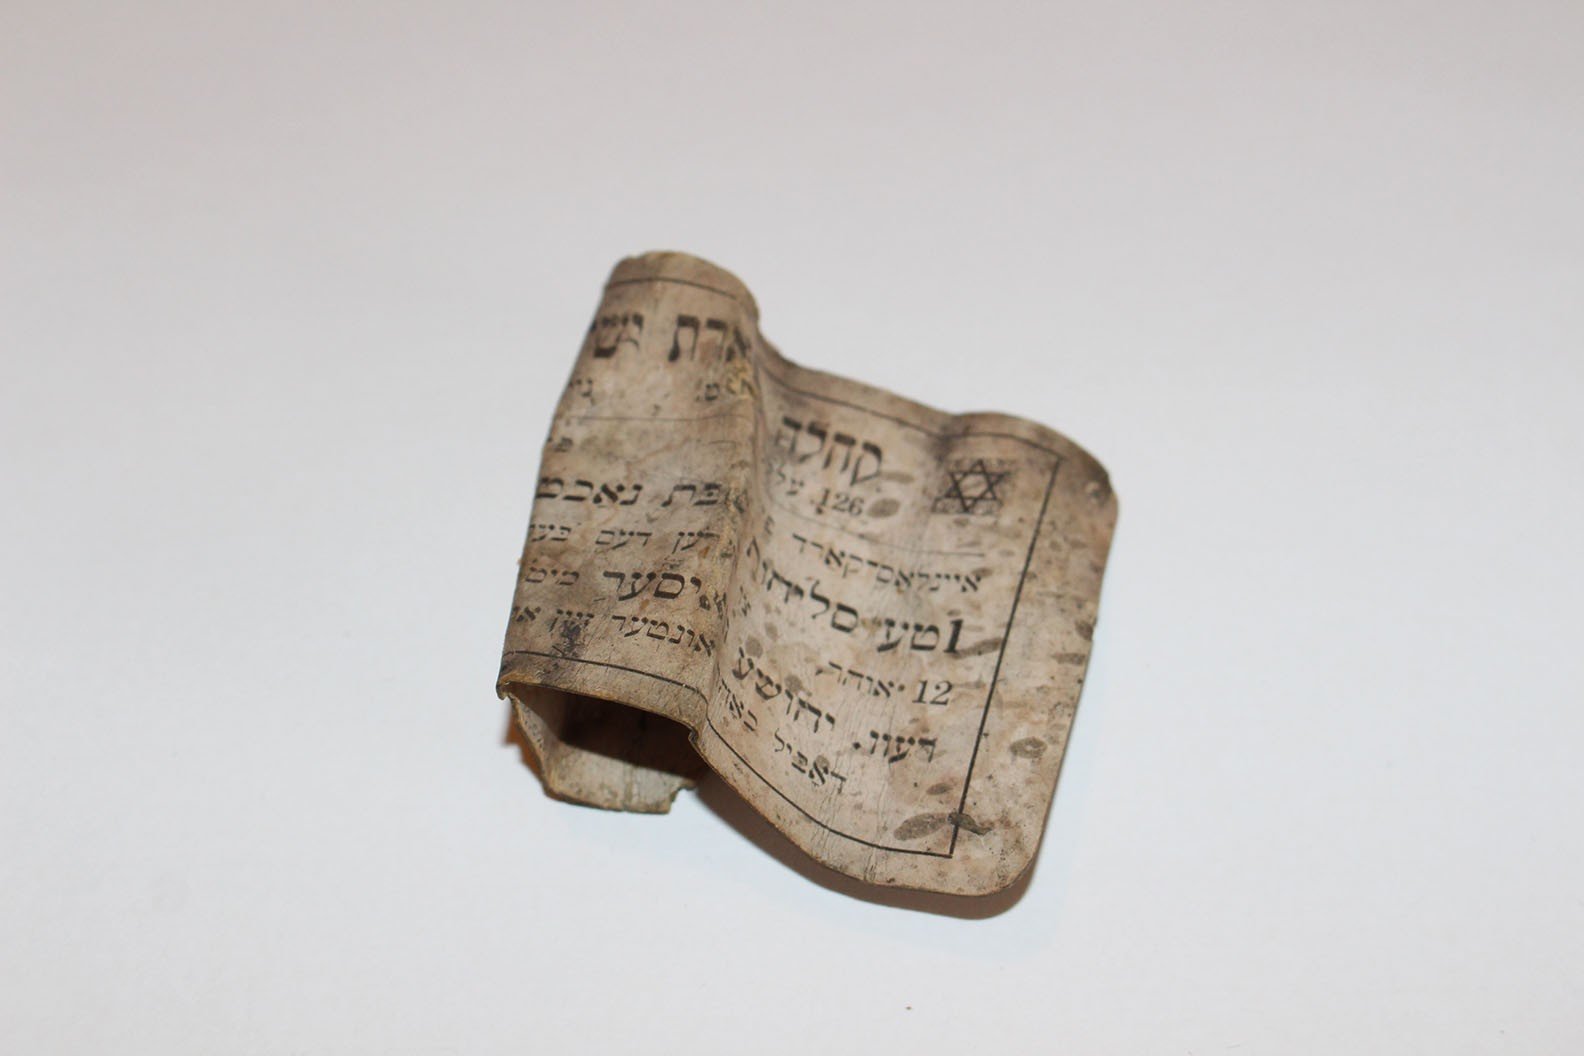 Small bit of paper with Hebrew writing found at 97 Orchard Street